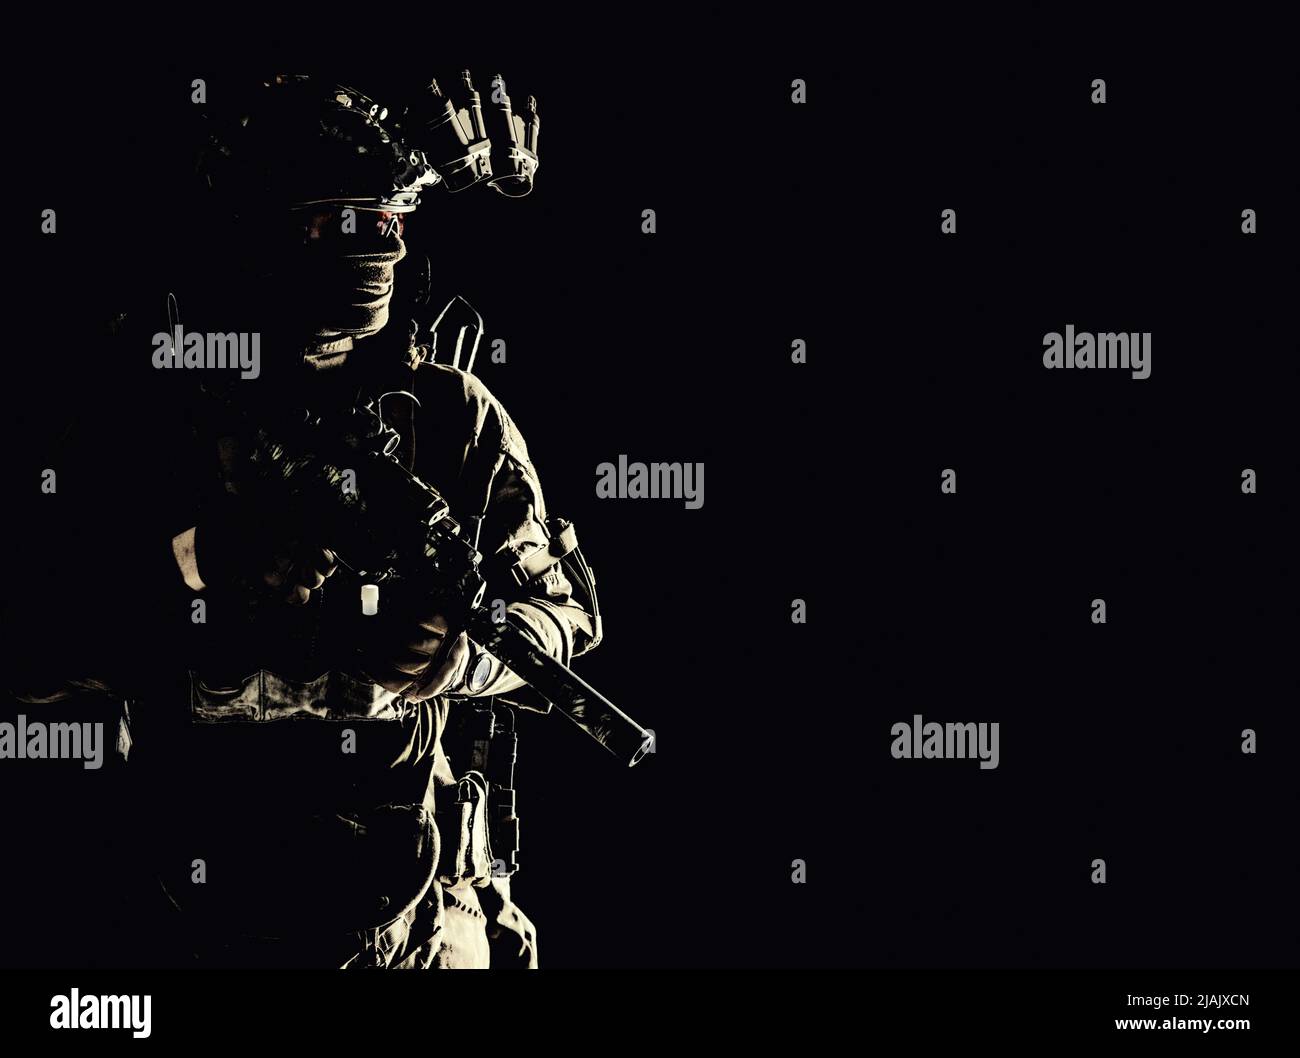 Special forces soldier equipped with night vision device and submachine gun with silencer, looking away. Stock Photo